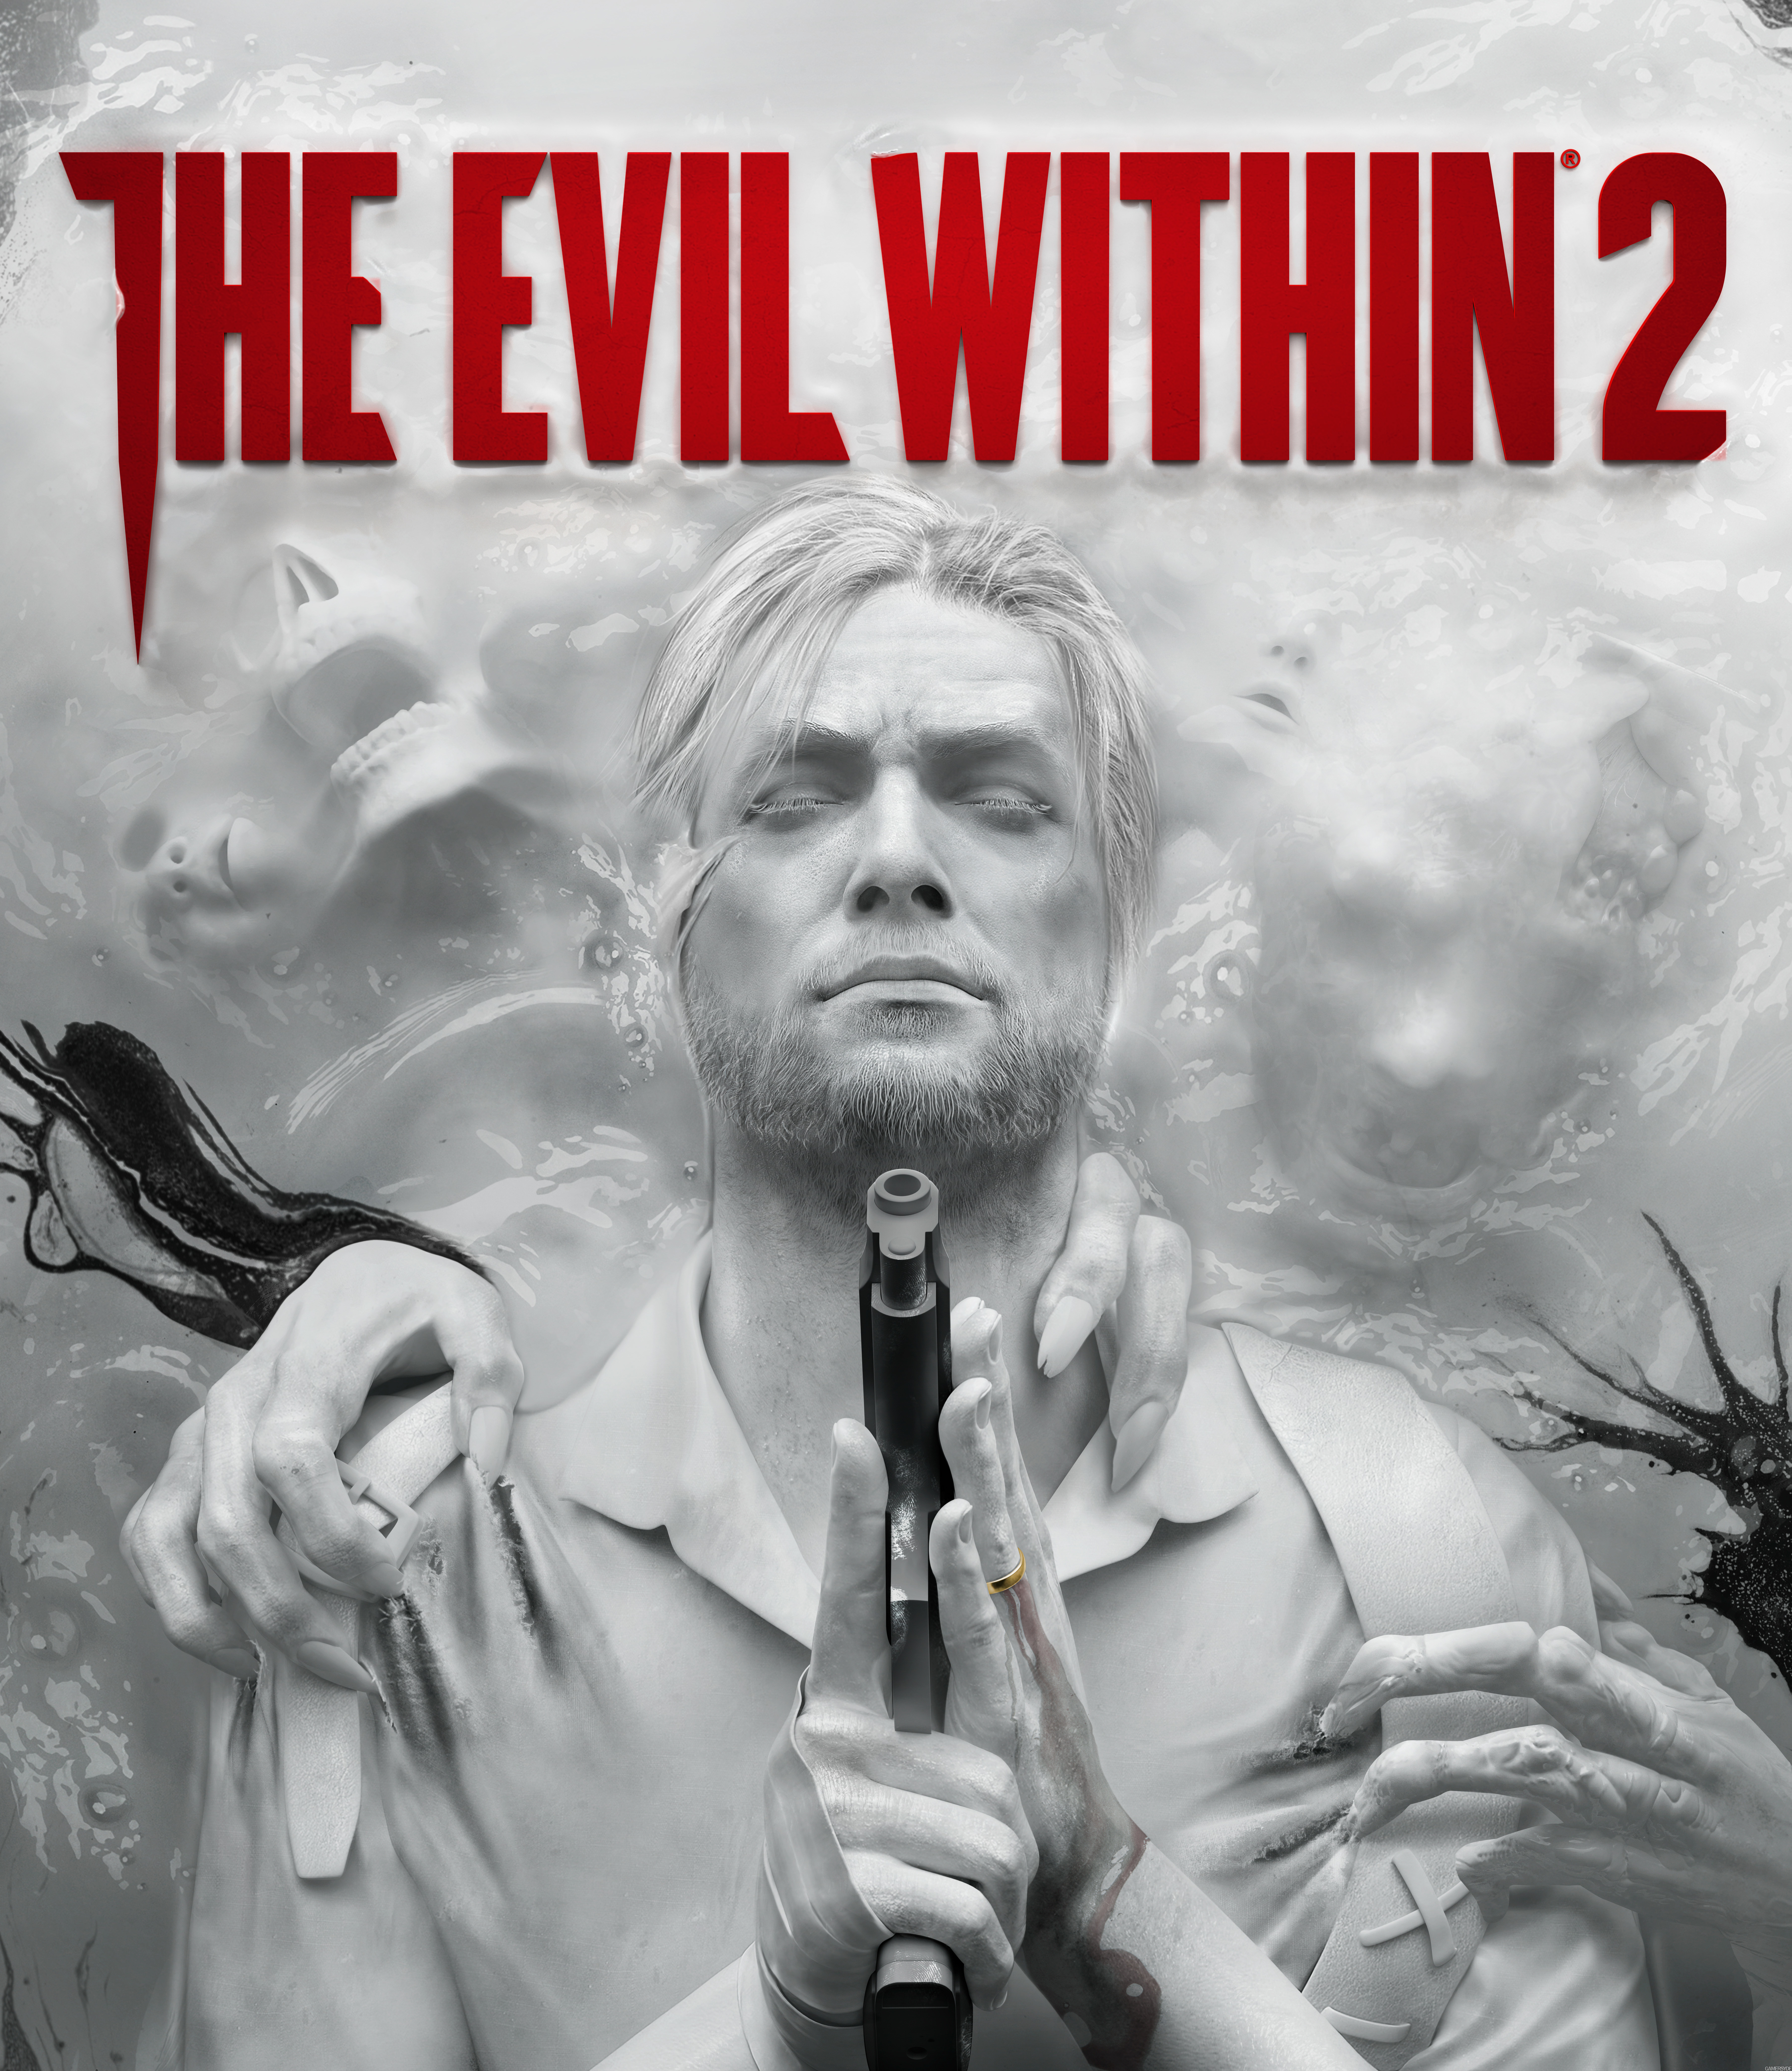 image_the_evil_within_2-35706-3886_0001.